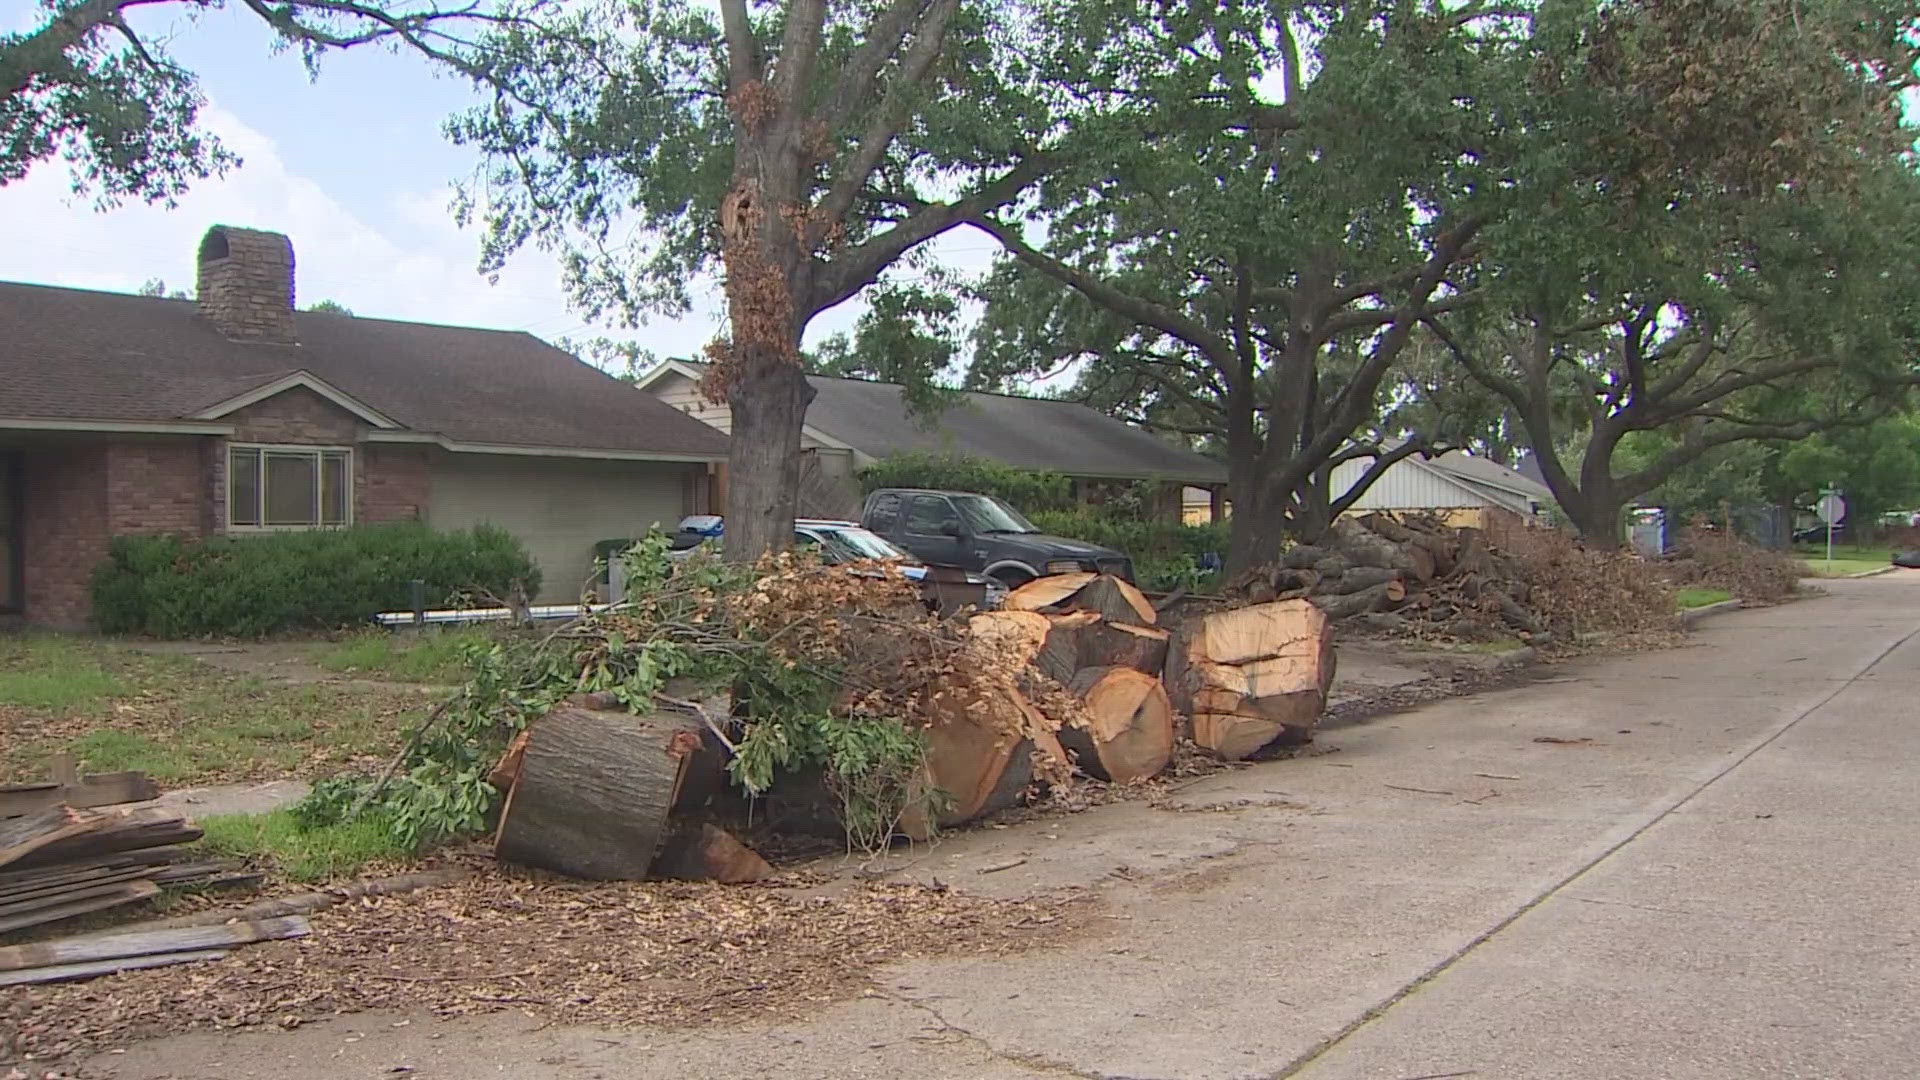 Piles of debris can be seen across the Timbergrove Manor neighborhood and folks patience is running thin.